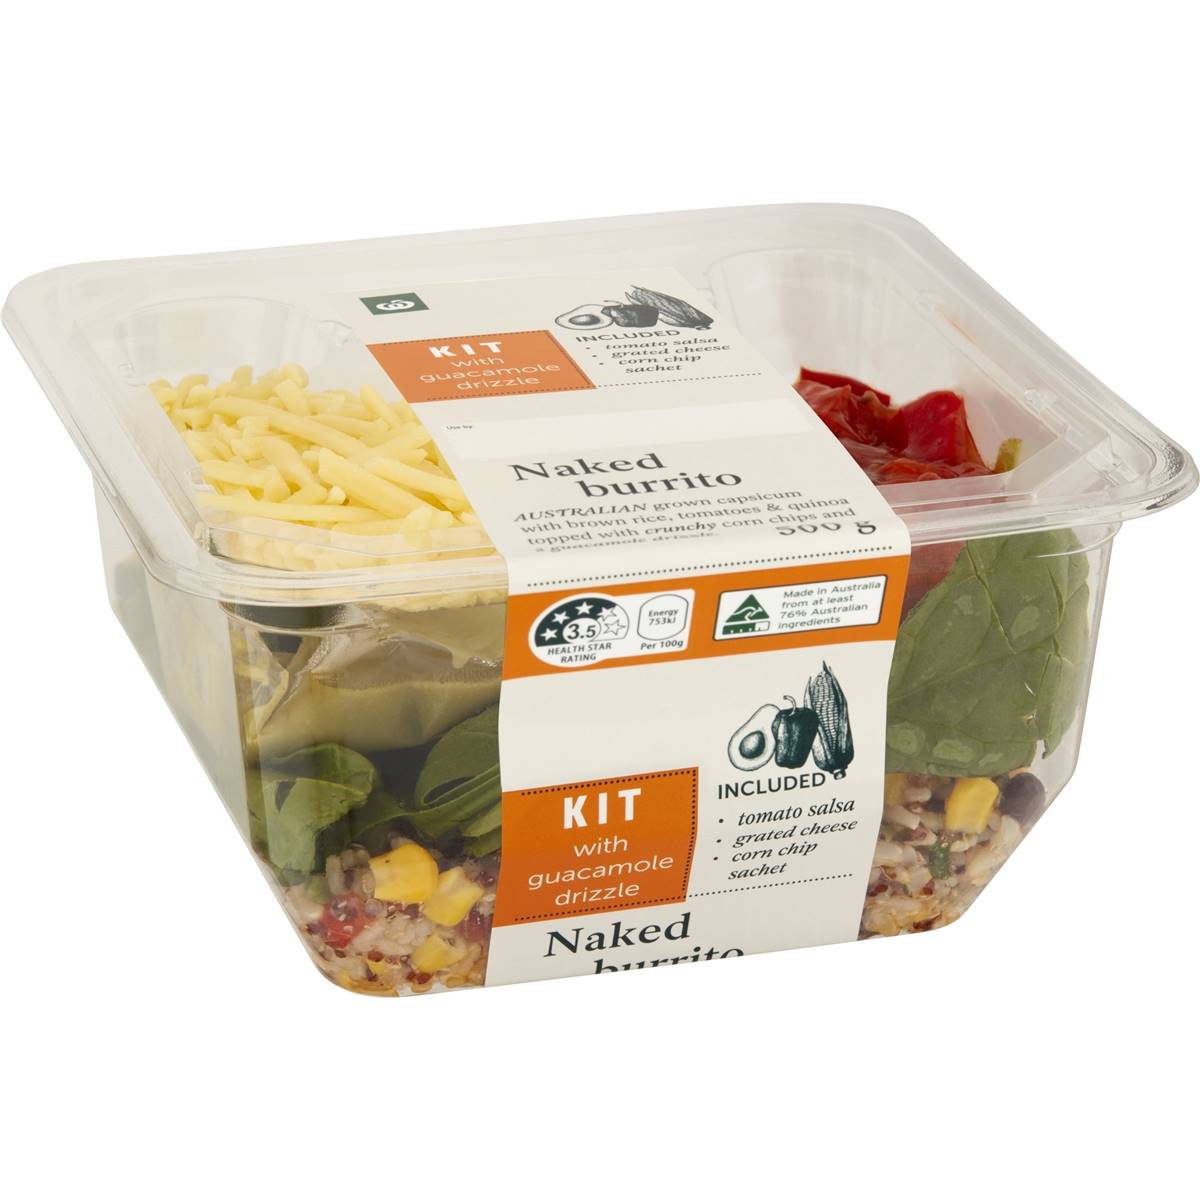 Calories in Woolworths Naked Burrito Kit